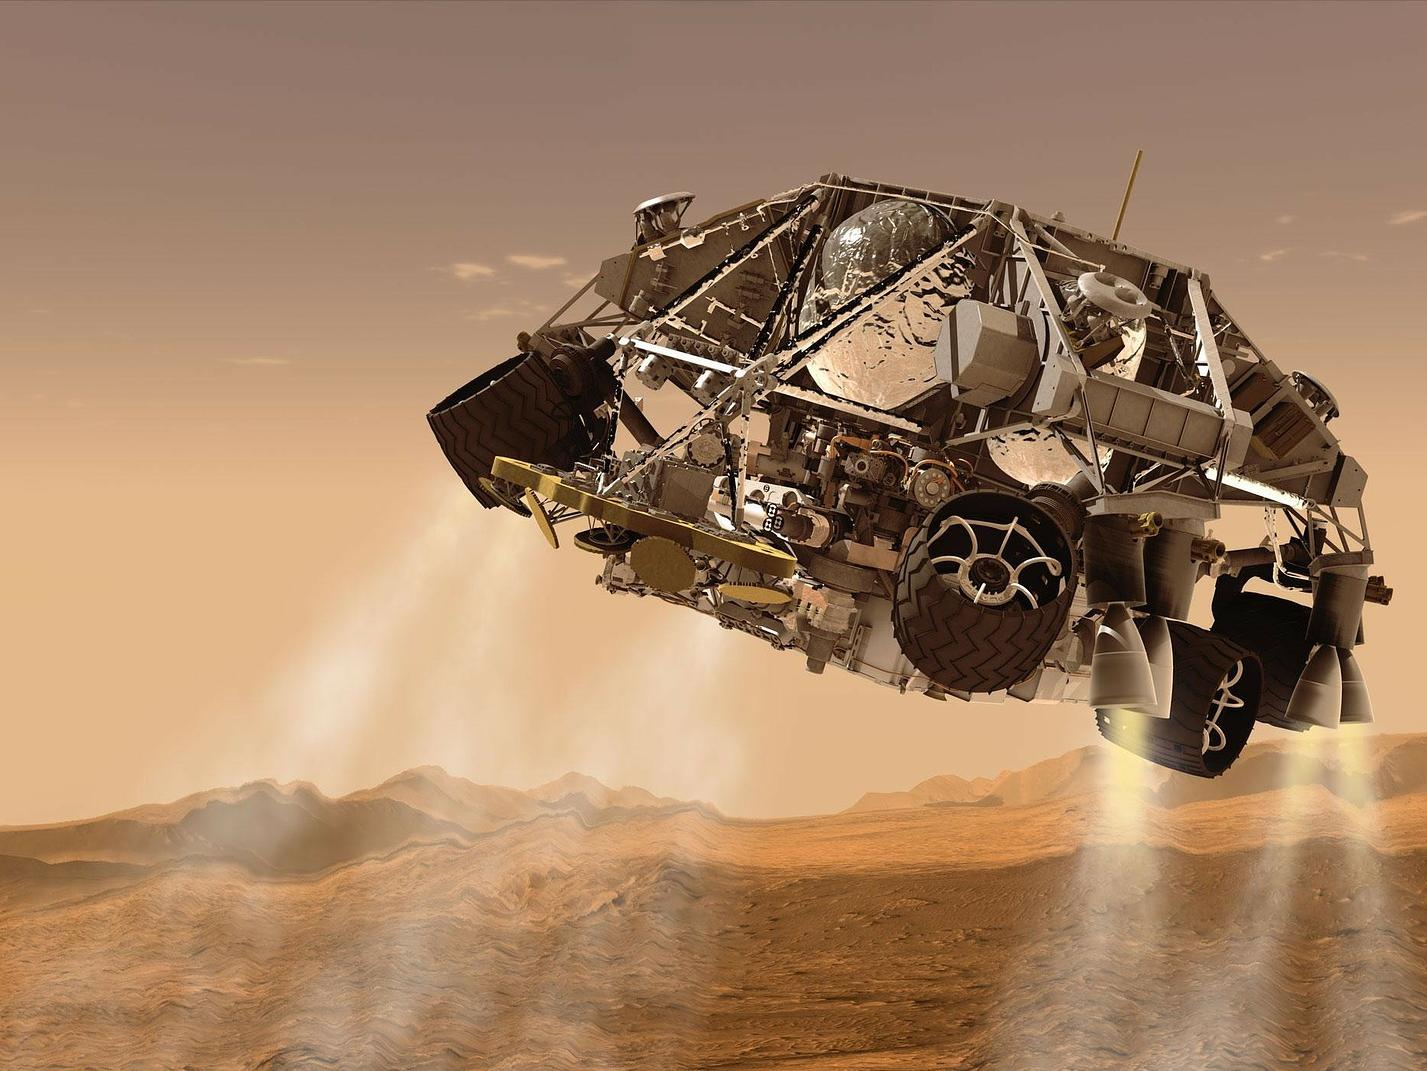 Thrust behind the Mars Rover mission